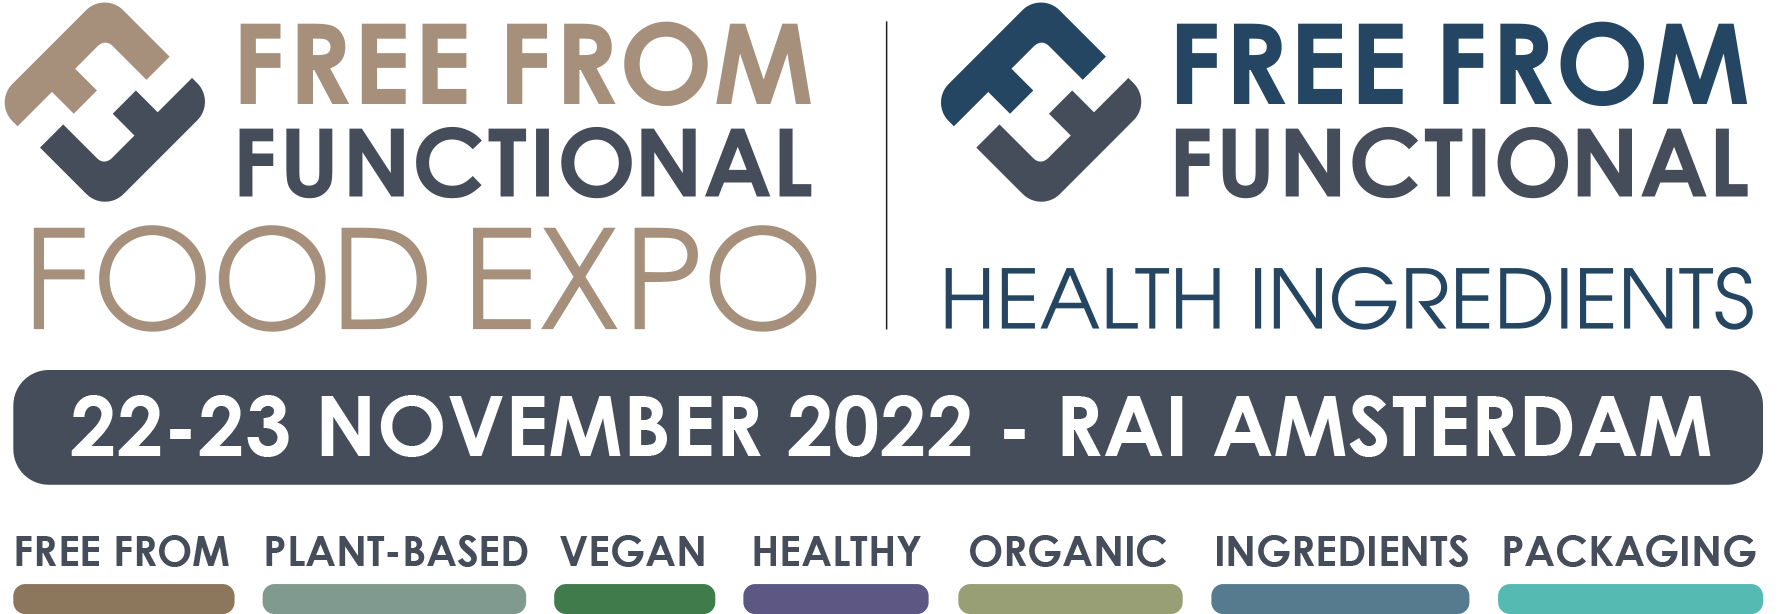 Free From Functional & Health Ingredients Expo